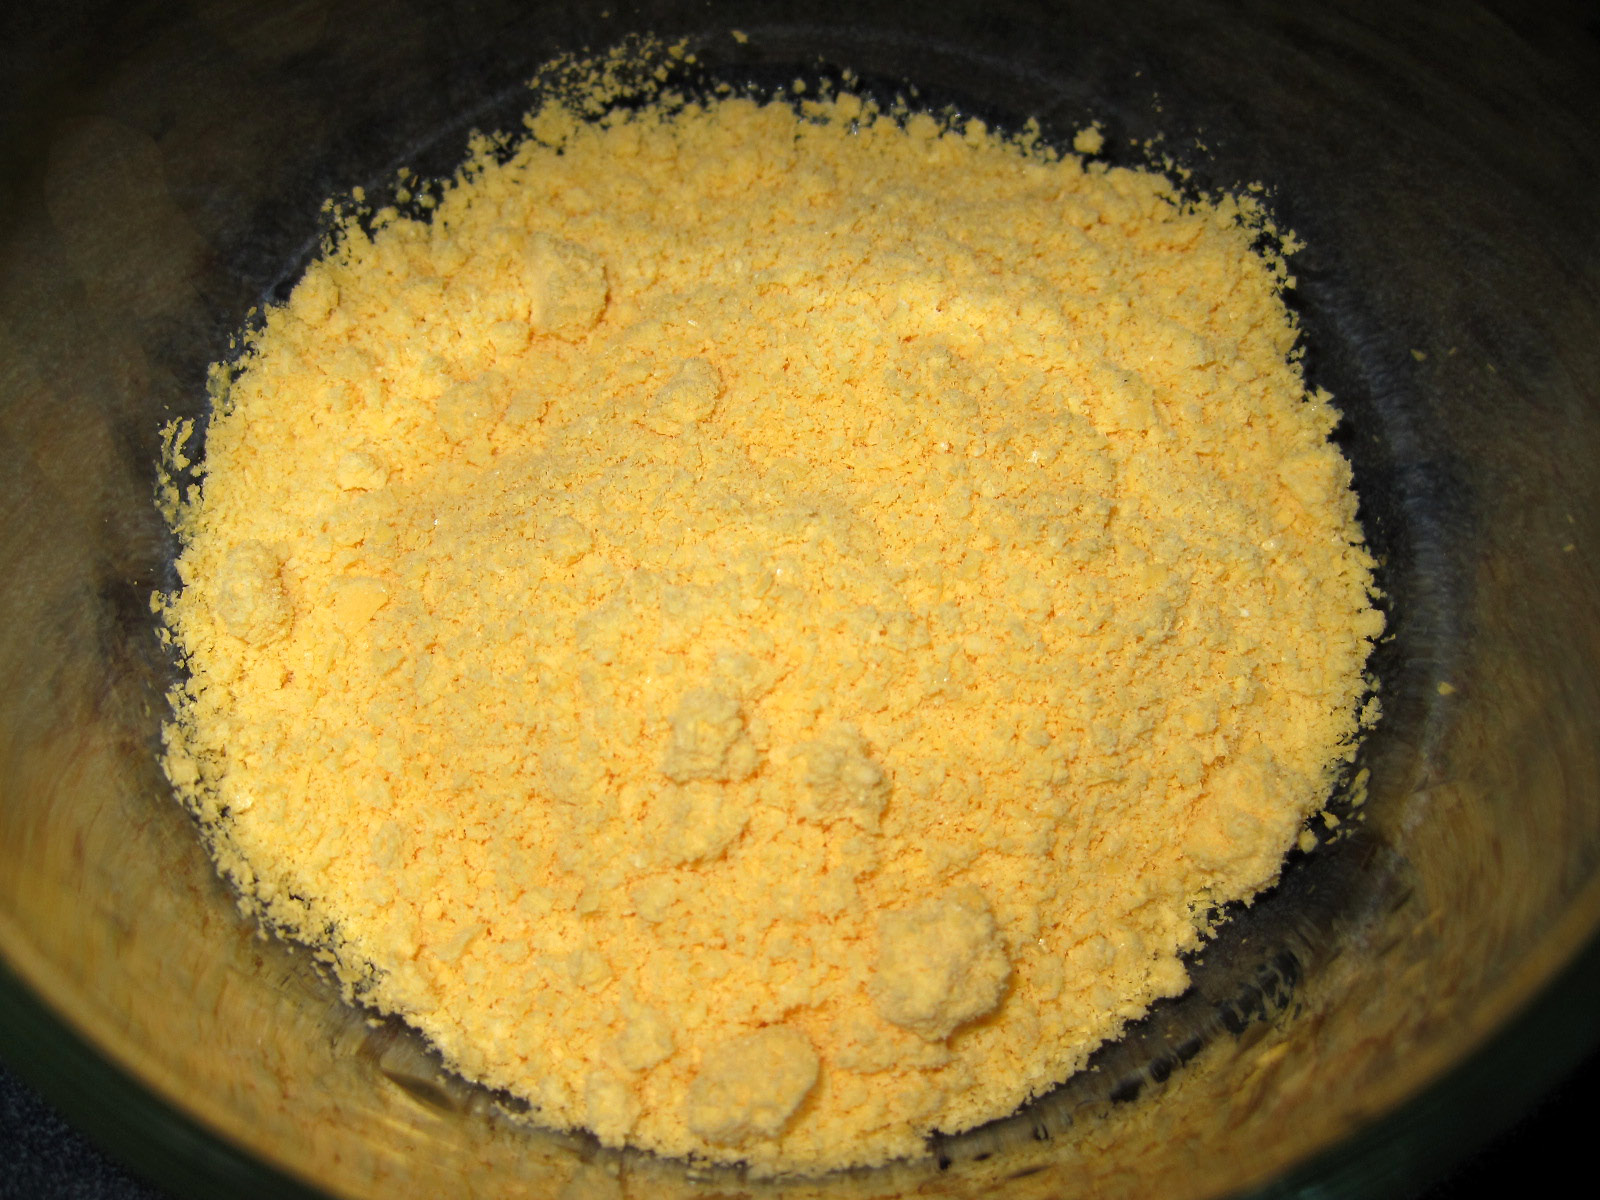 The scrambled eggs in fast food restaurants aren't actual scrambled eggs in many cases. For convenience they are being prepared out of powder mixed with water and then heated up.